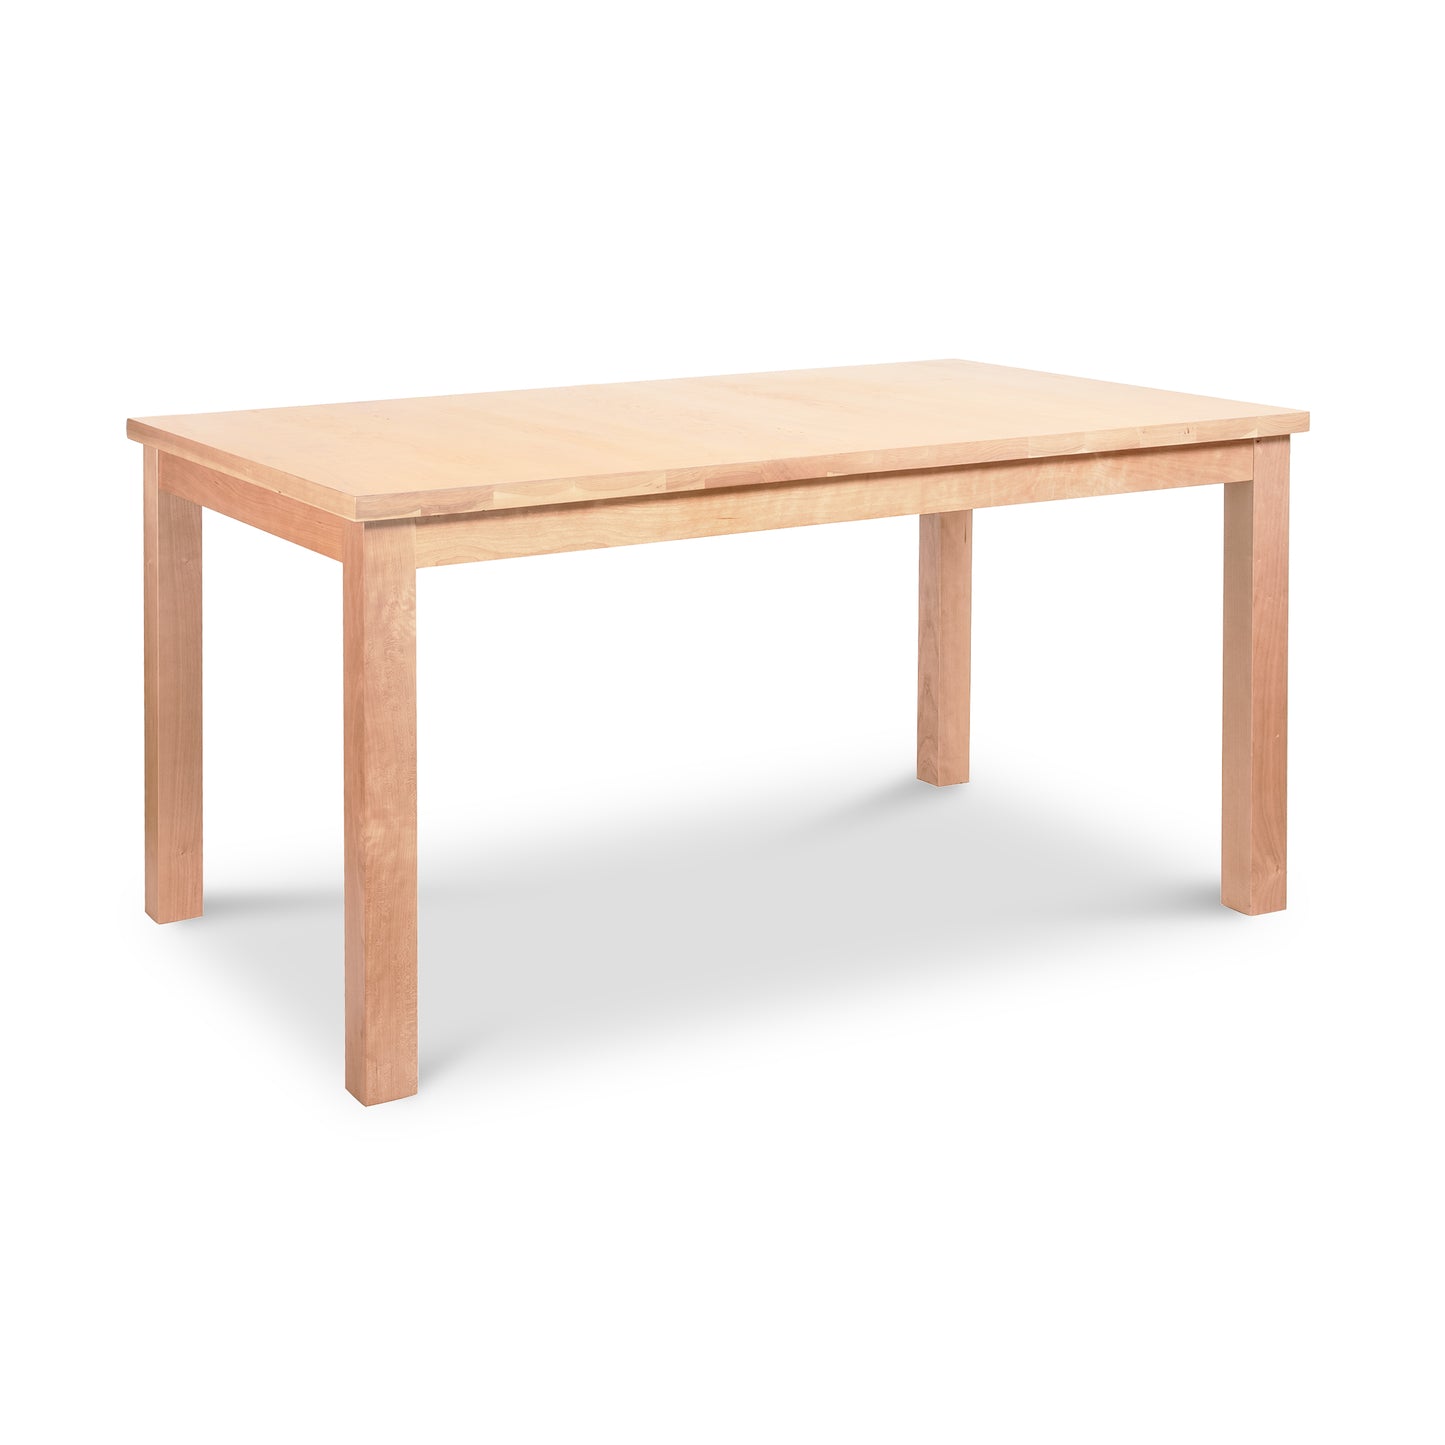 An eco-friendly Modern Mission Parsons Solid Top Table by Lyndon Furniture on a white background.